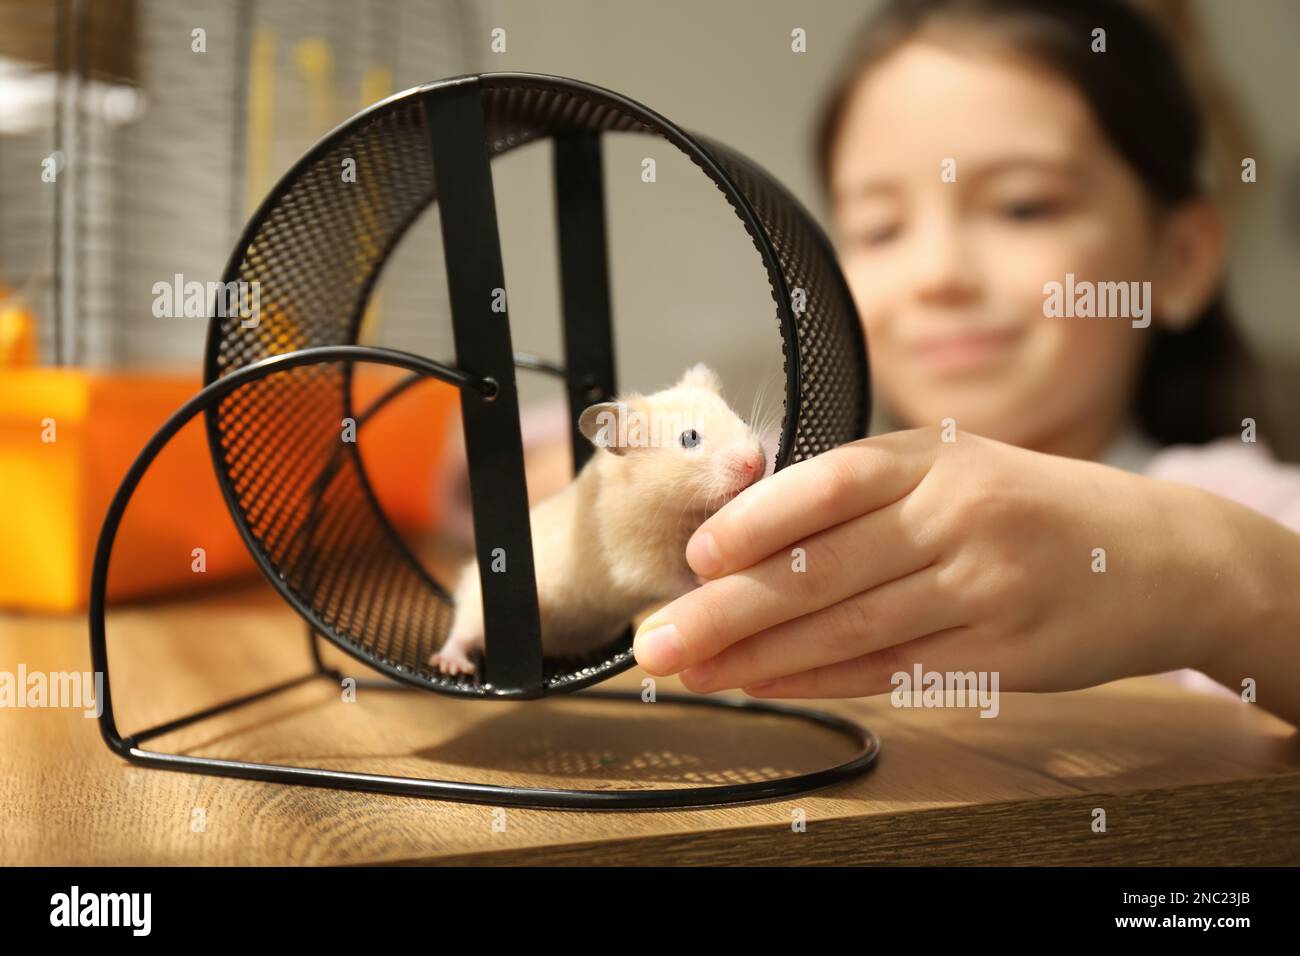 Little girl watching her hamster playing in spinning wheel at home, focus on hands Stock Photo